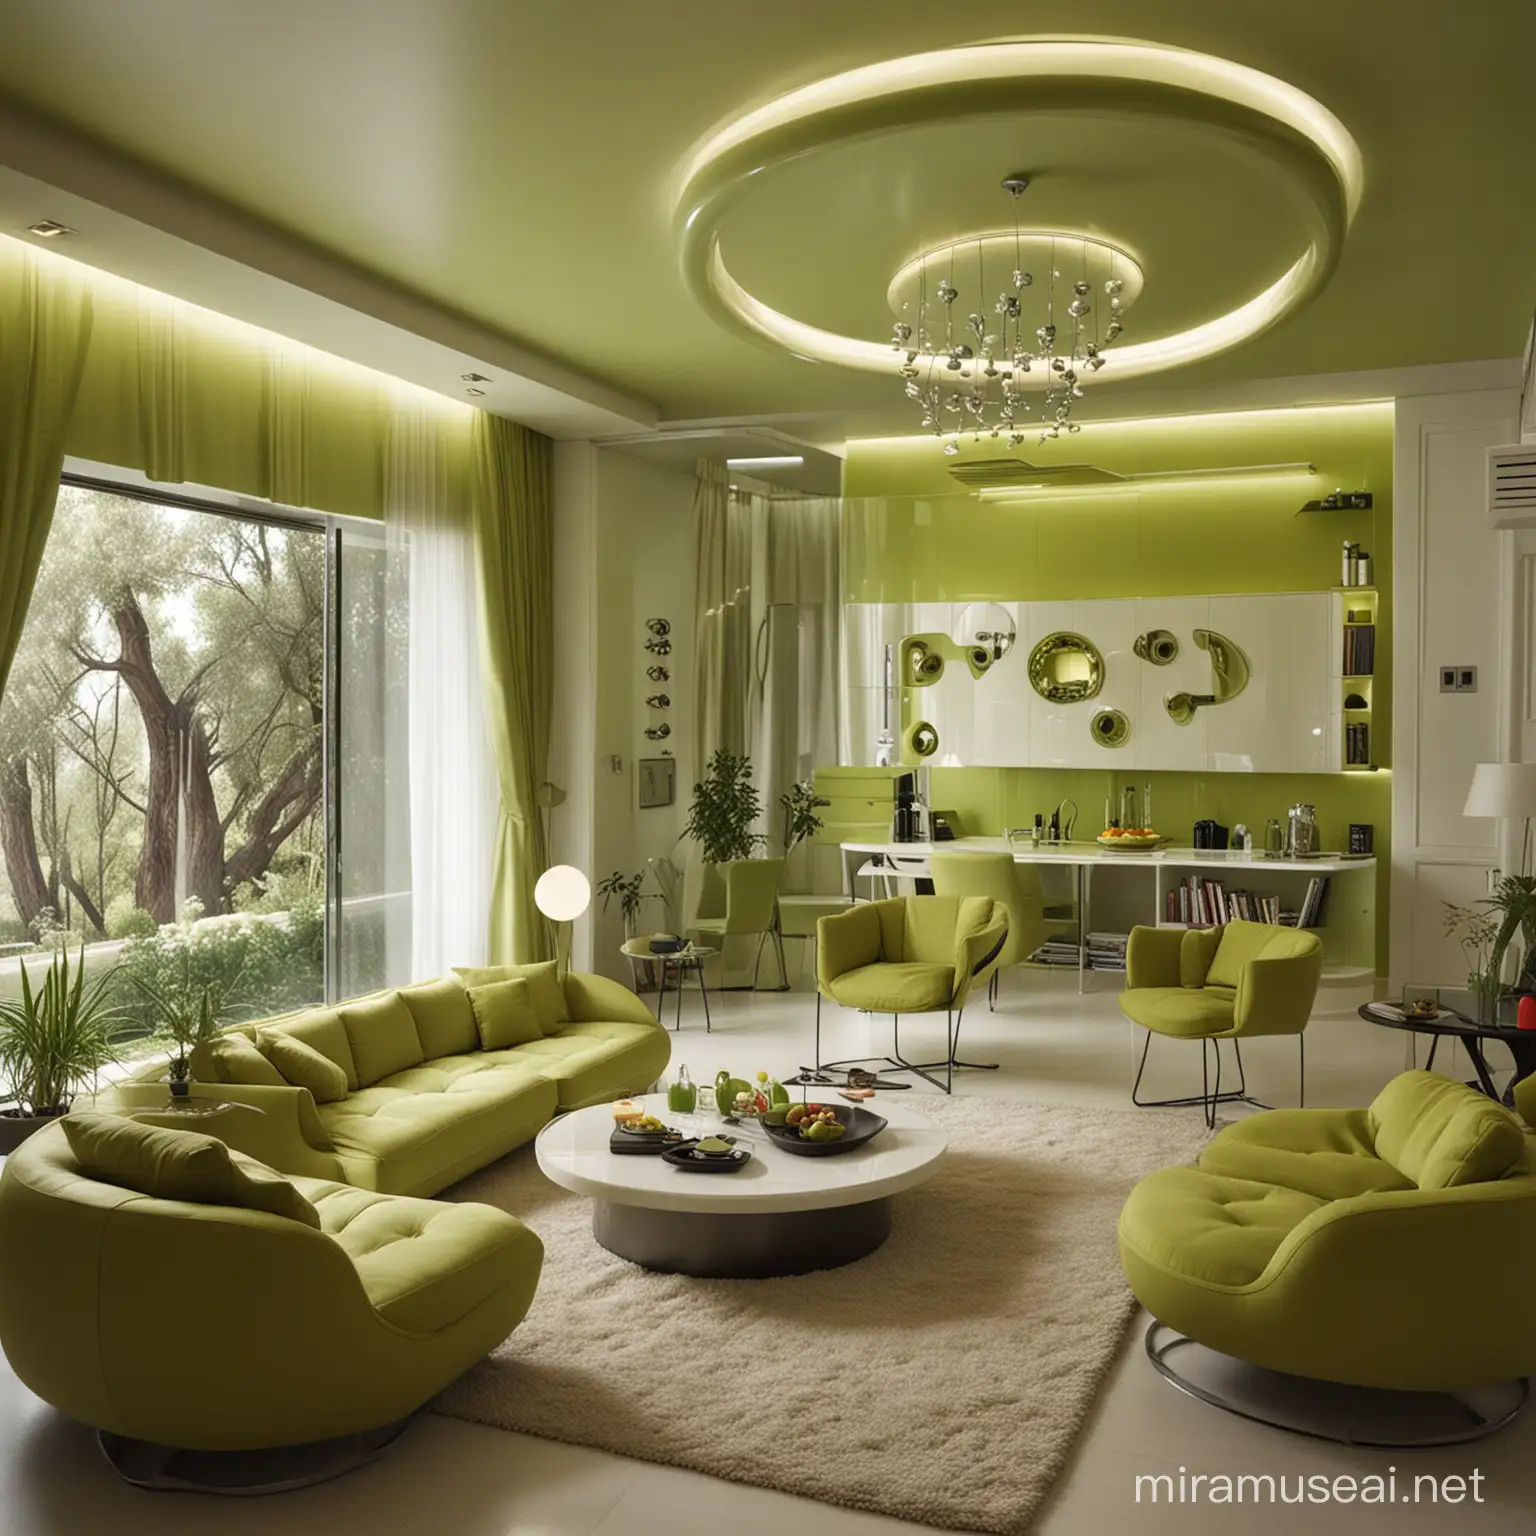 Futuristic Living Room 2090 with Green Olives and Entree